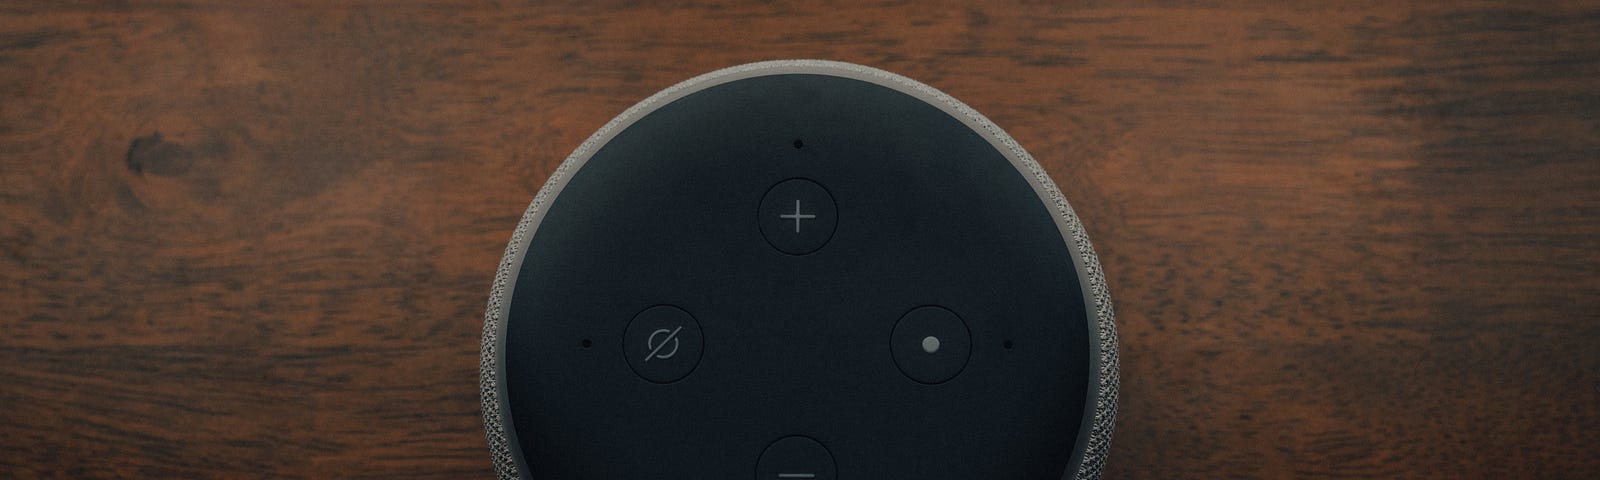 A photo of an amazon echo device as seen from the top.